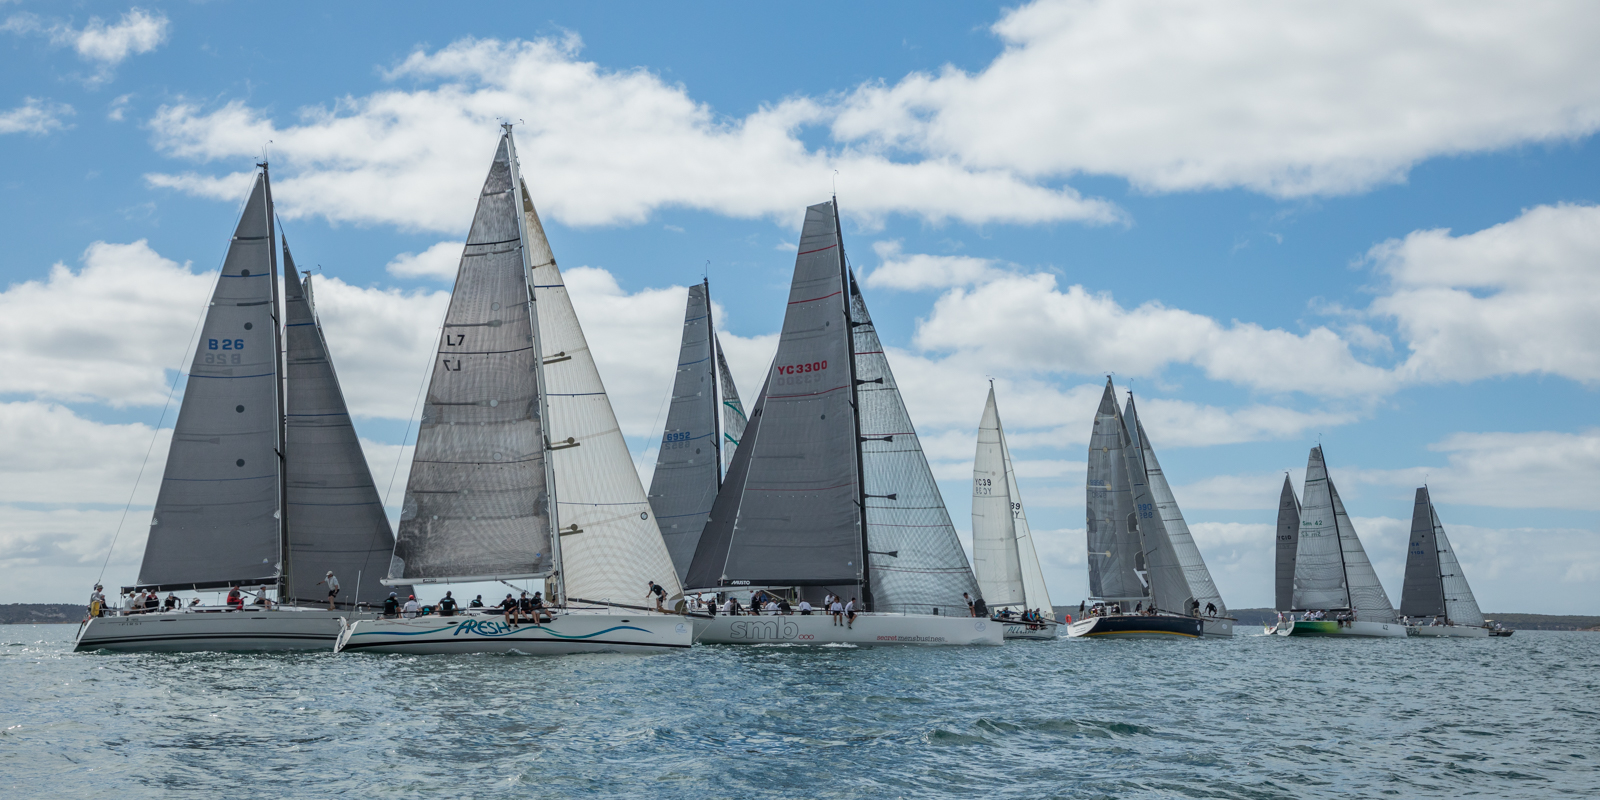 Division one racing at the Lincoln Week Regatta on Boston Bay, Port Lincoln. Photo: Take 2 Photography